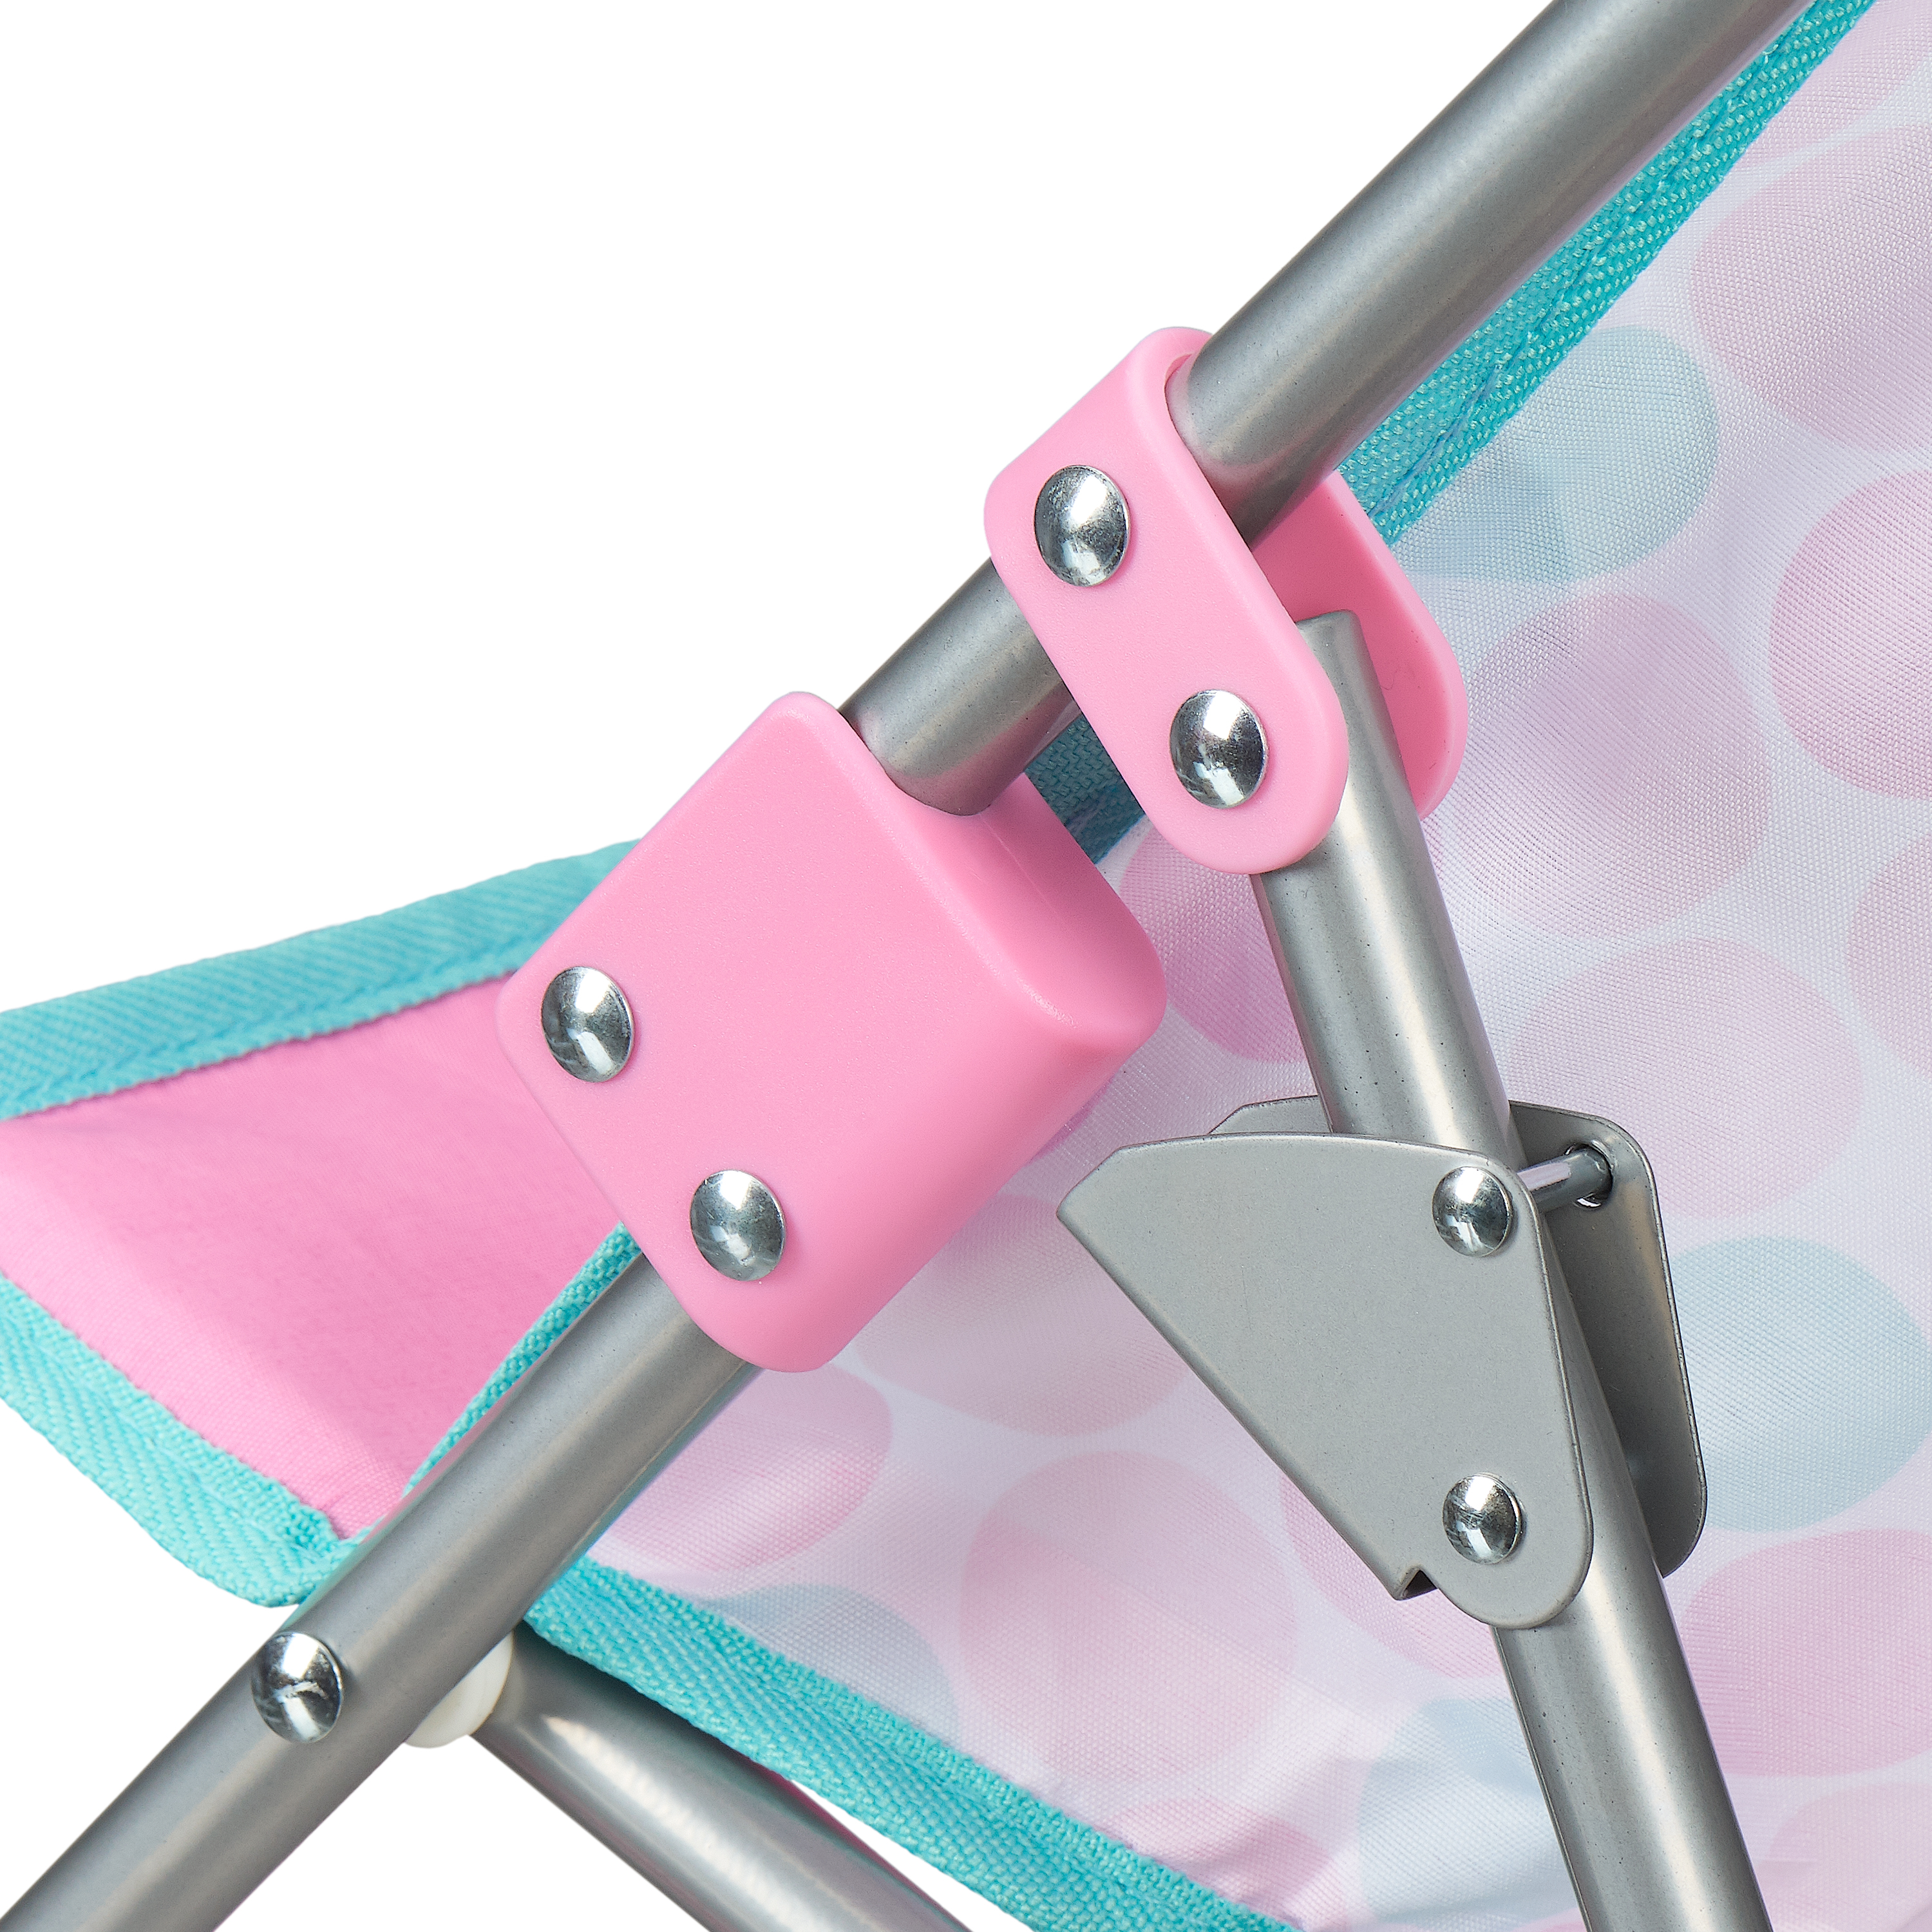 My Sweet Love Umbrella Stroller for Dolls, Multicolor - image 5 of 5